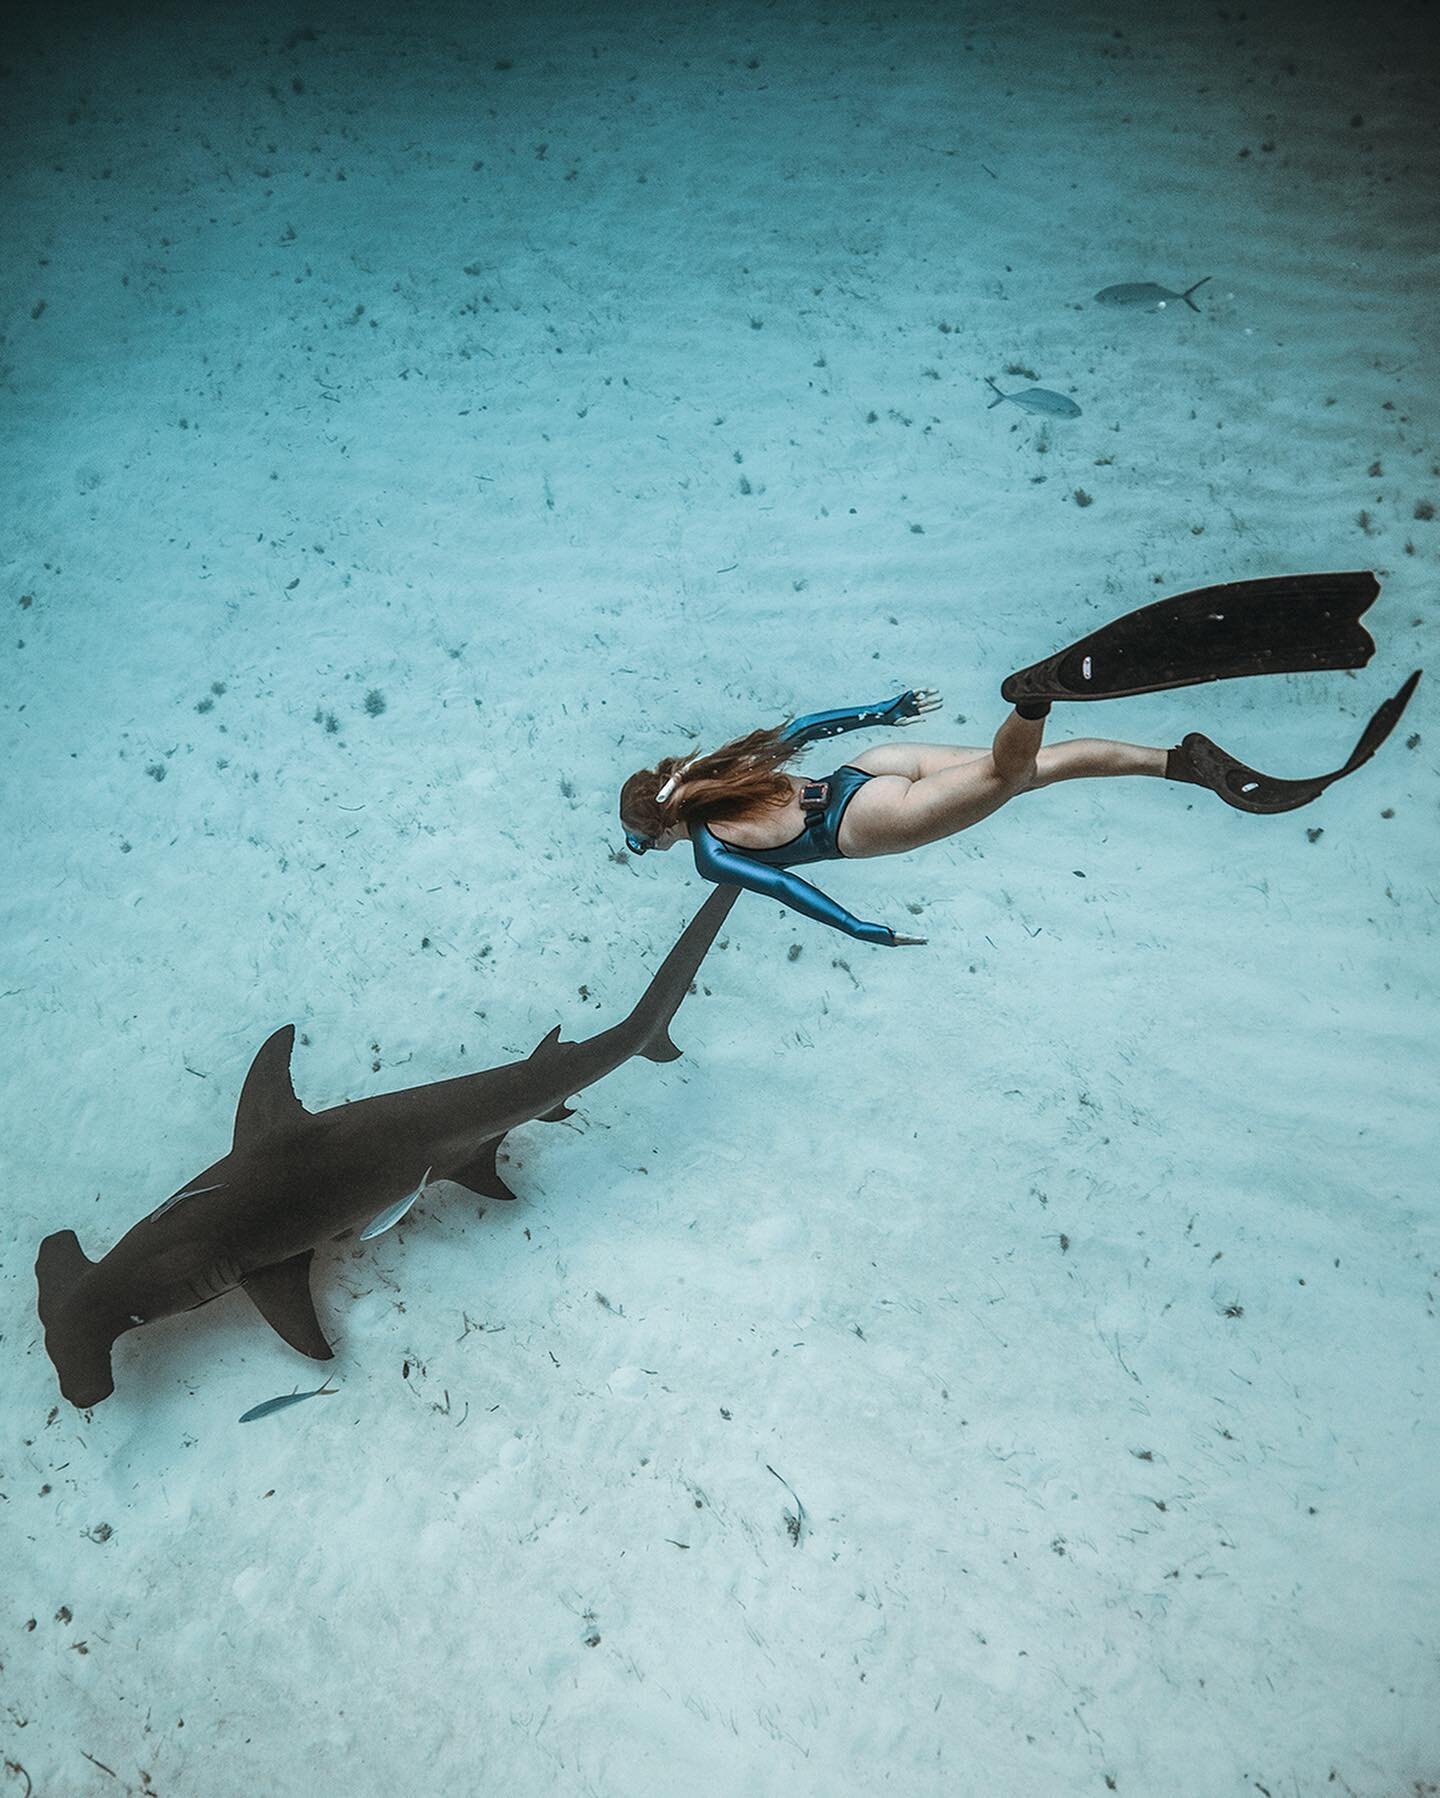 Another shark appreciation post because we can&rsquo;t get enough of these beautiful creatures!! Hammerheads are among our favorites 😍
.
Thanks @mattgrondinphoto for the incredible shot 🦈 
.
.
.
.
.
#freedivingart #freediving #freedive #freedivingp